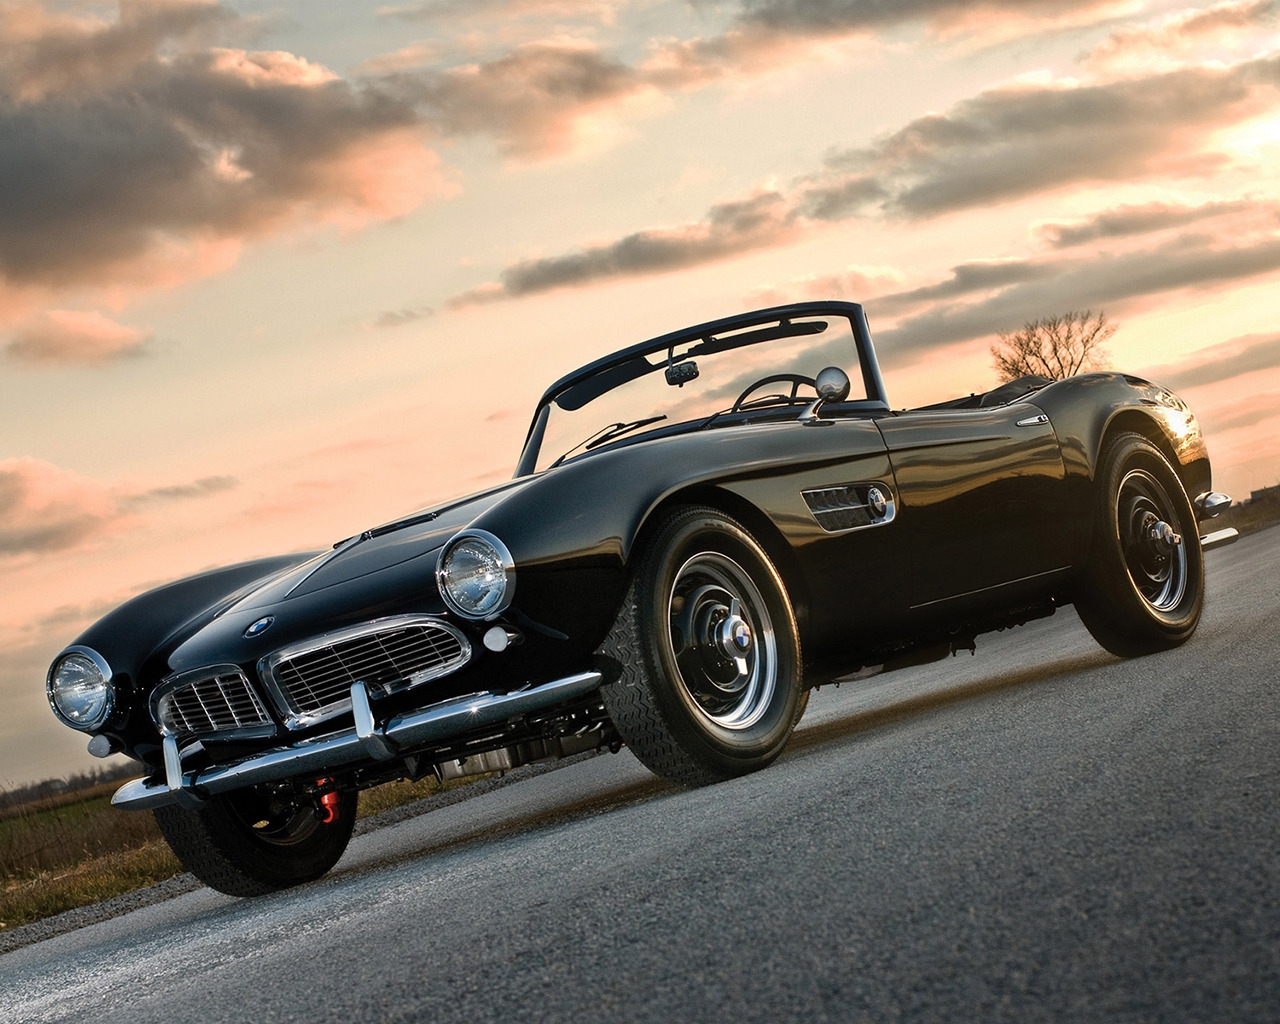 Amazing BMW 507 from 1957 for 1280 x 1024 resolution